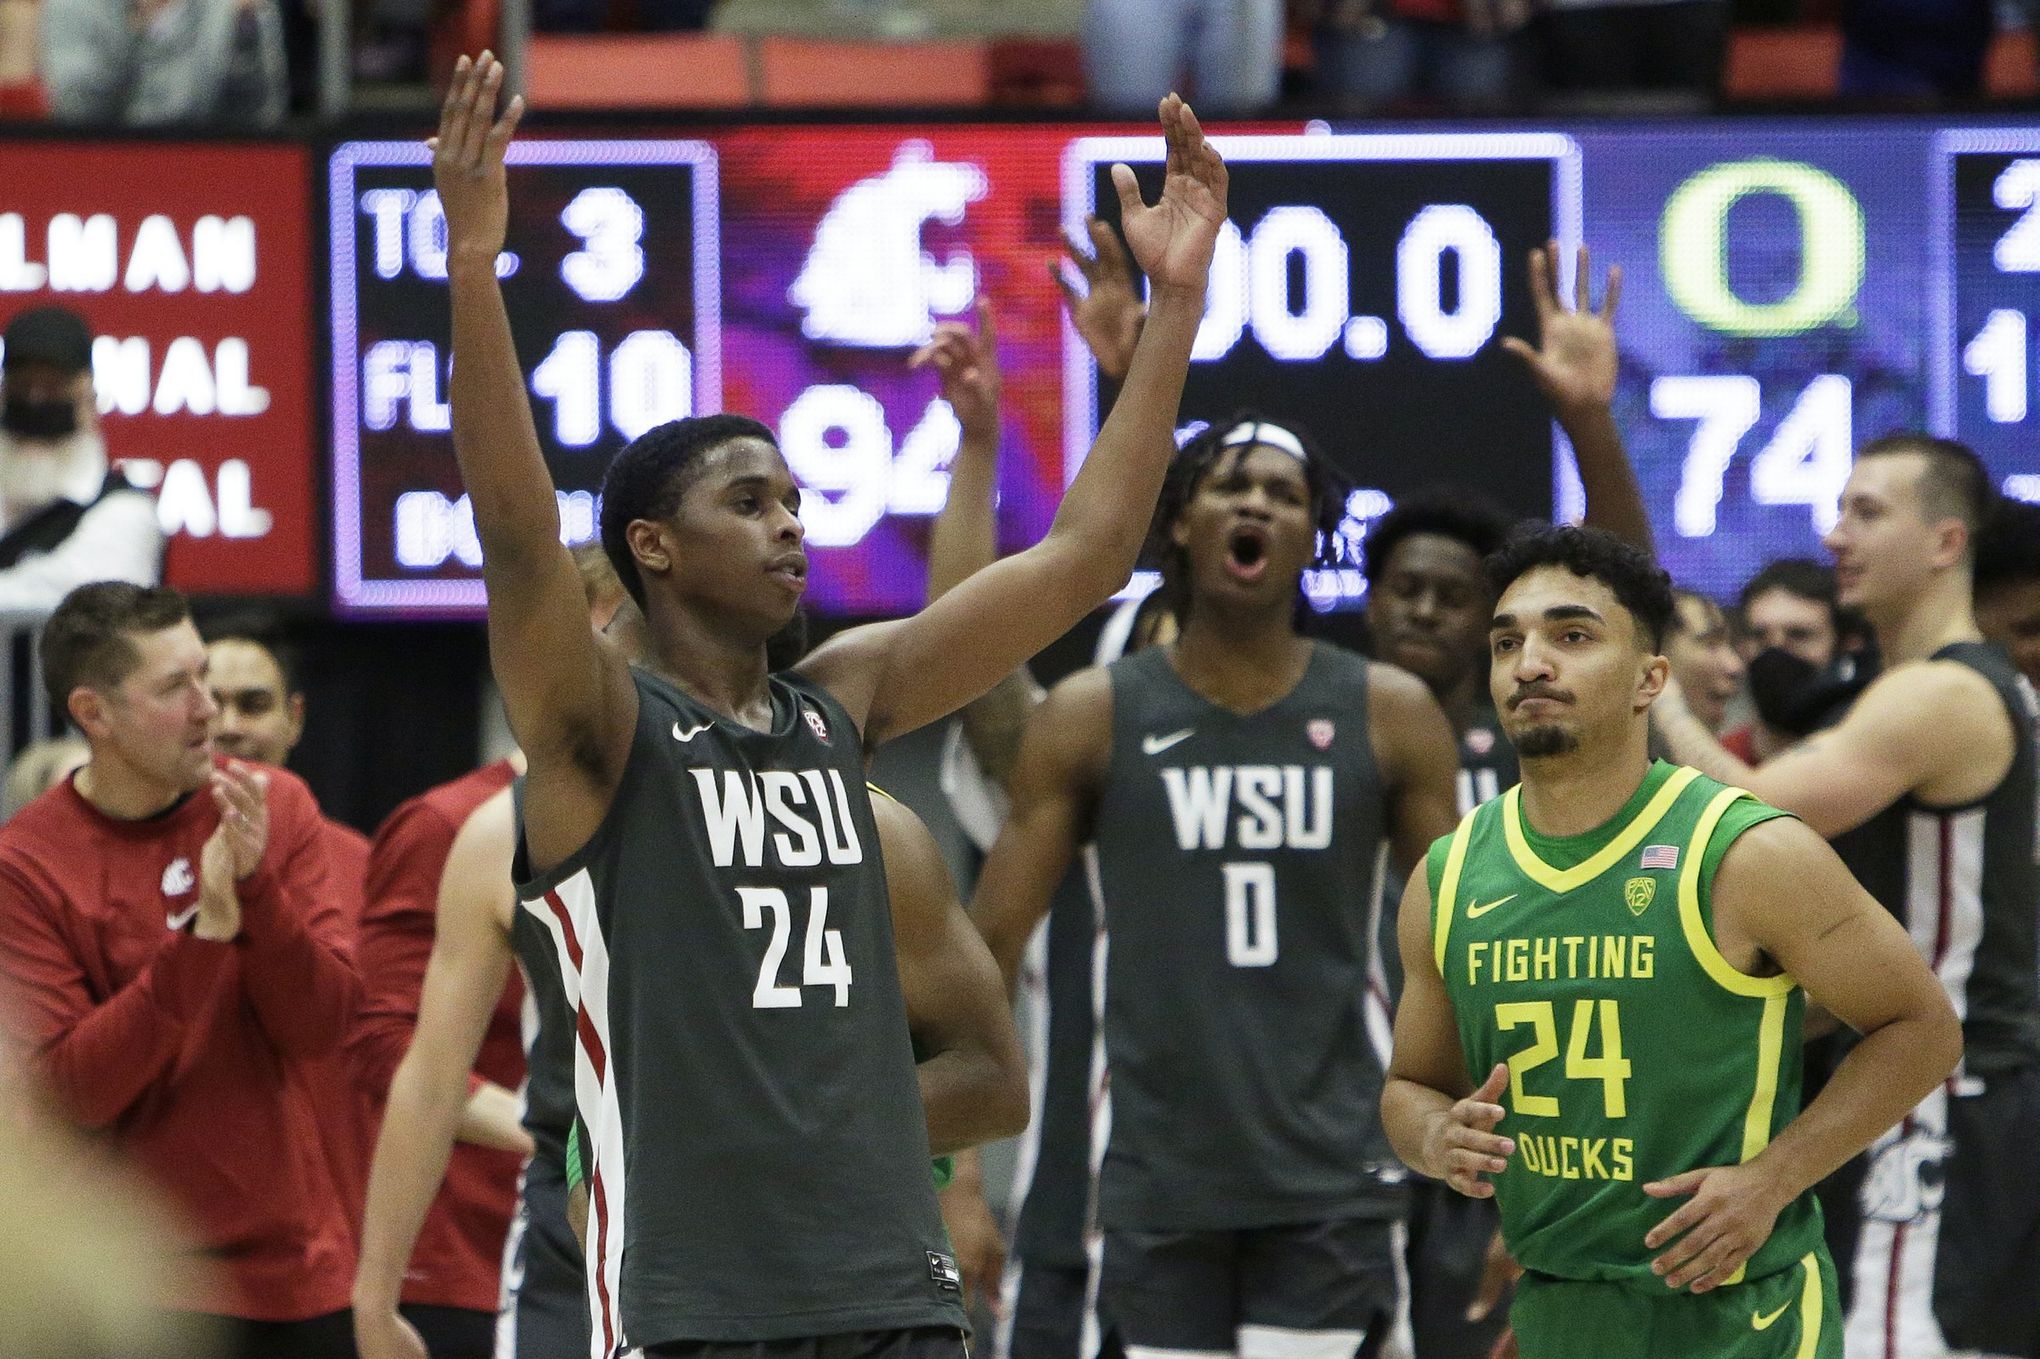 Oregon Basketball: Ducks start hot in Pac-12 play with win over WSU